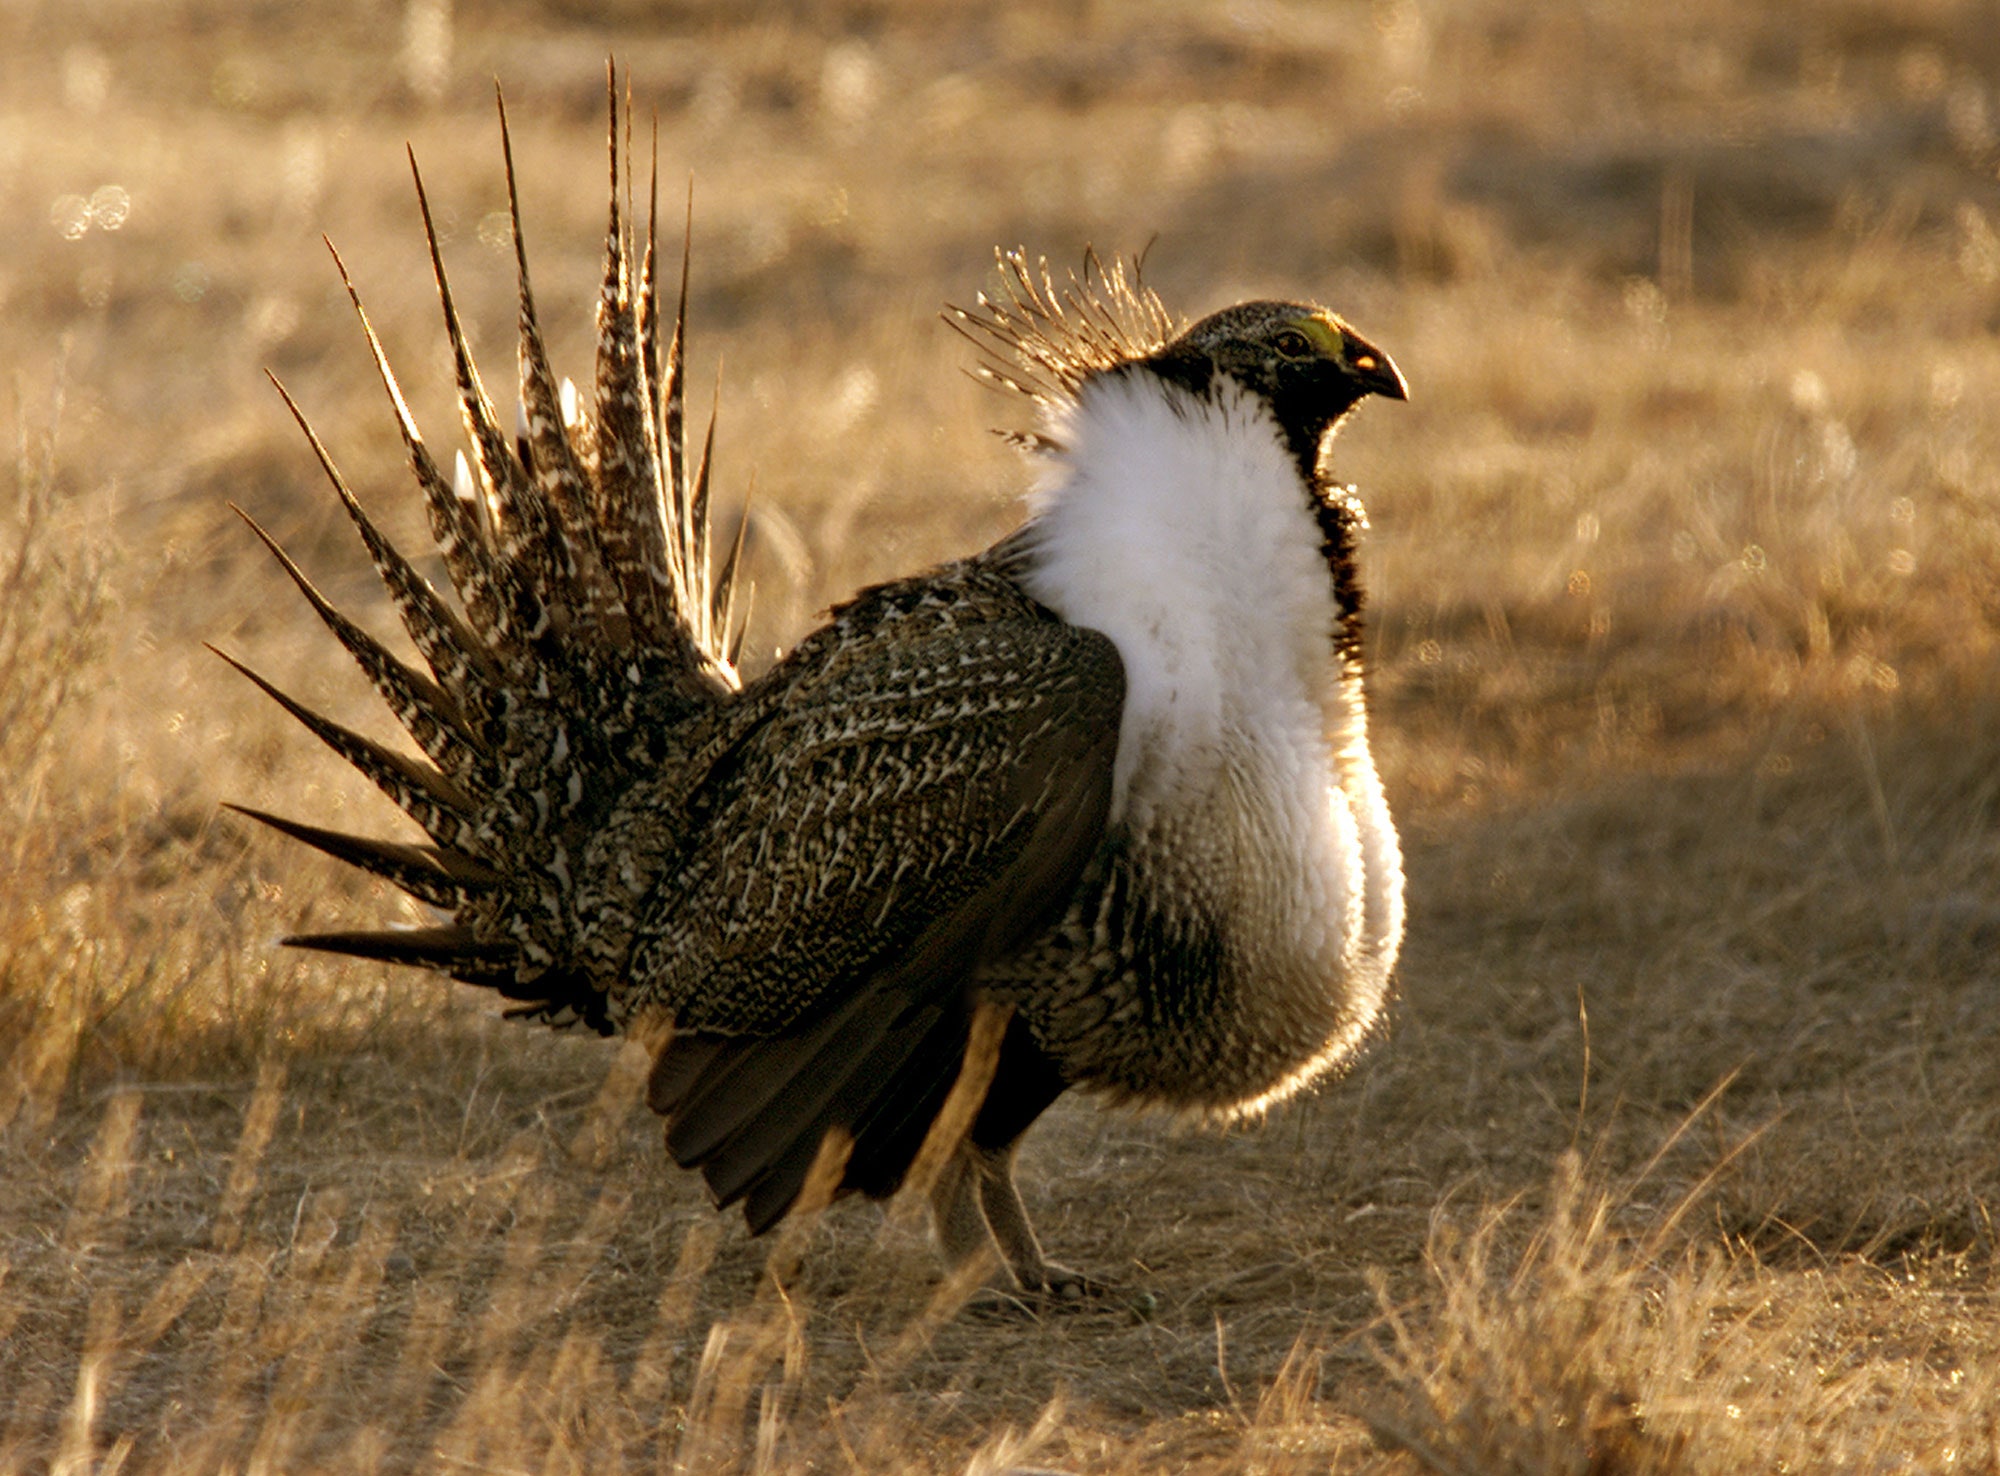 In the nineteenth century sage grouse were so numerous that they enabled hungry Europeans to expand across the American...